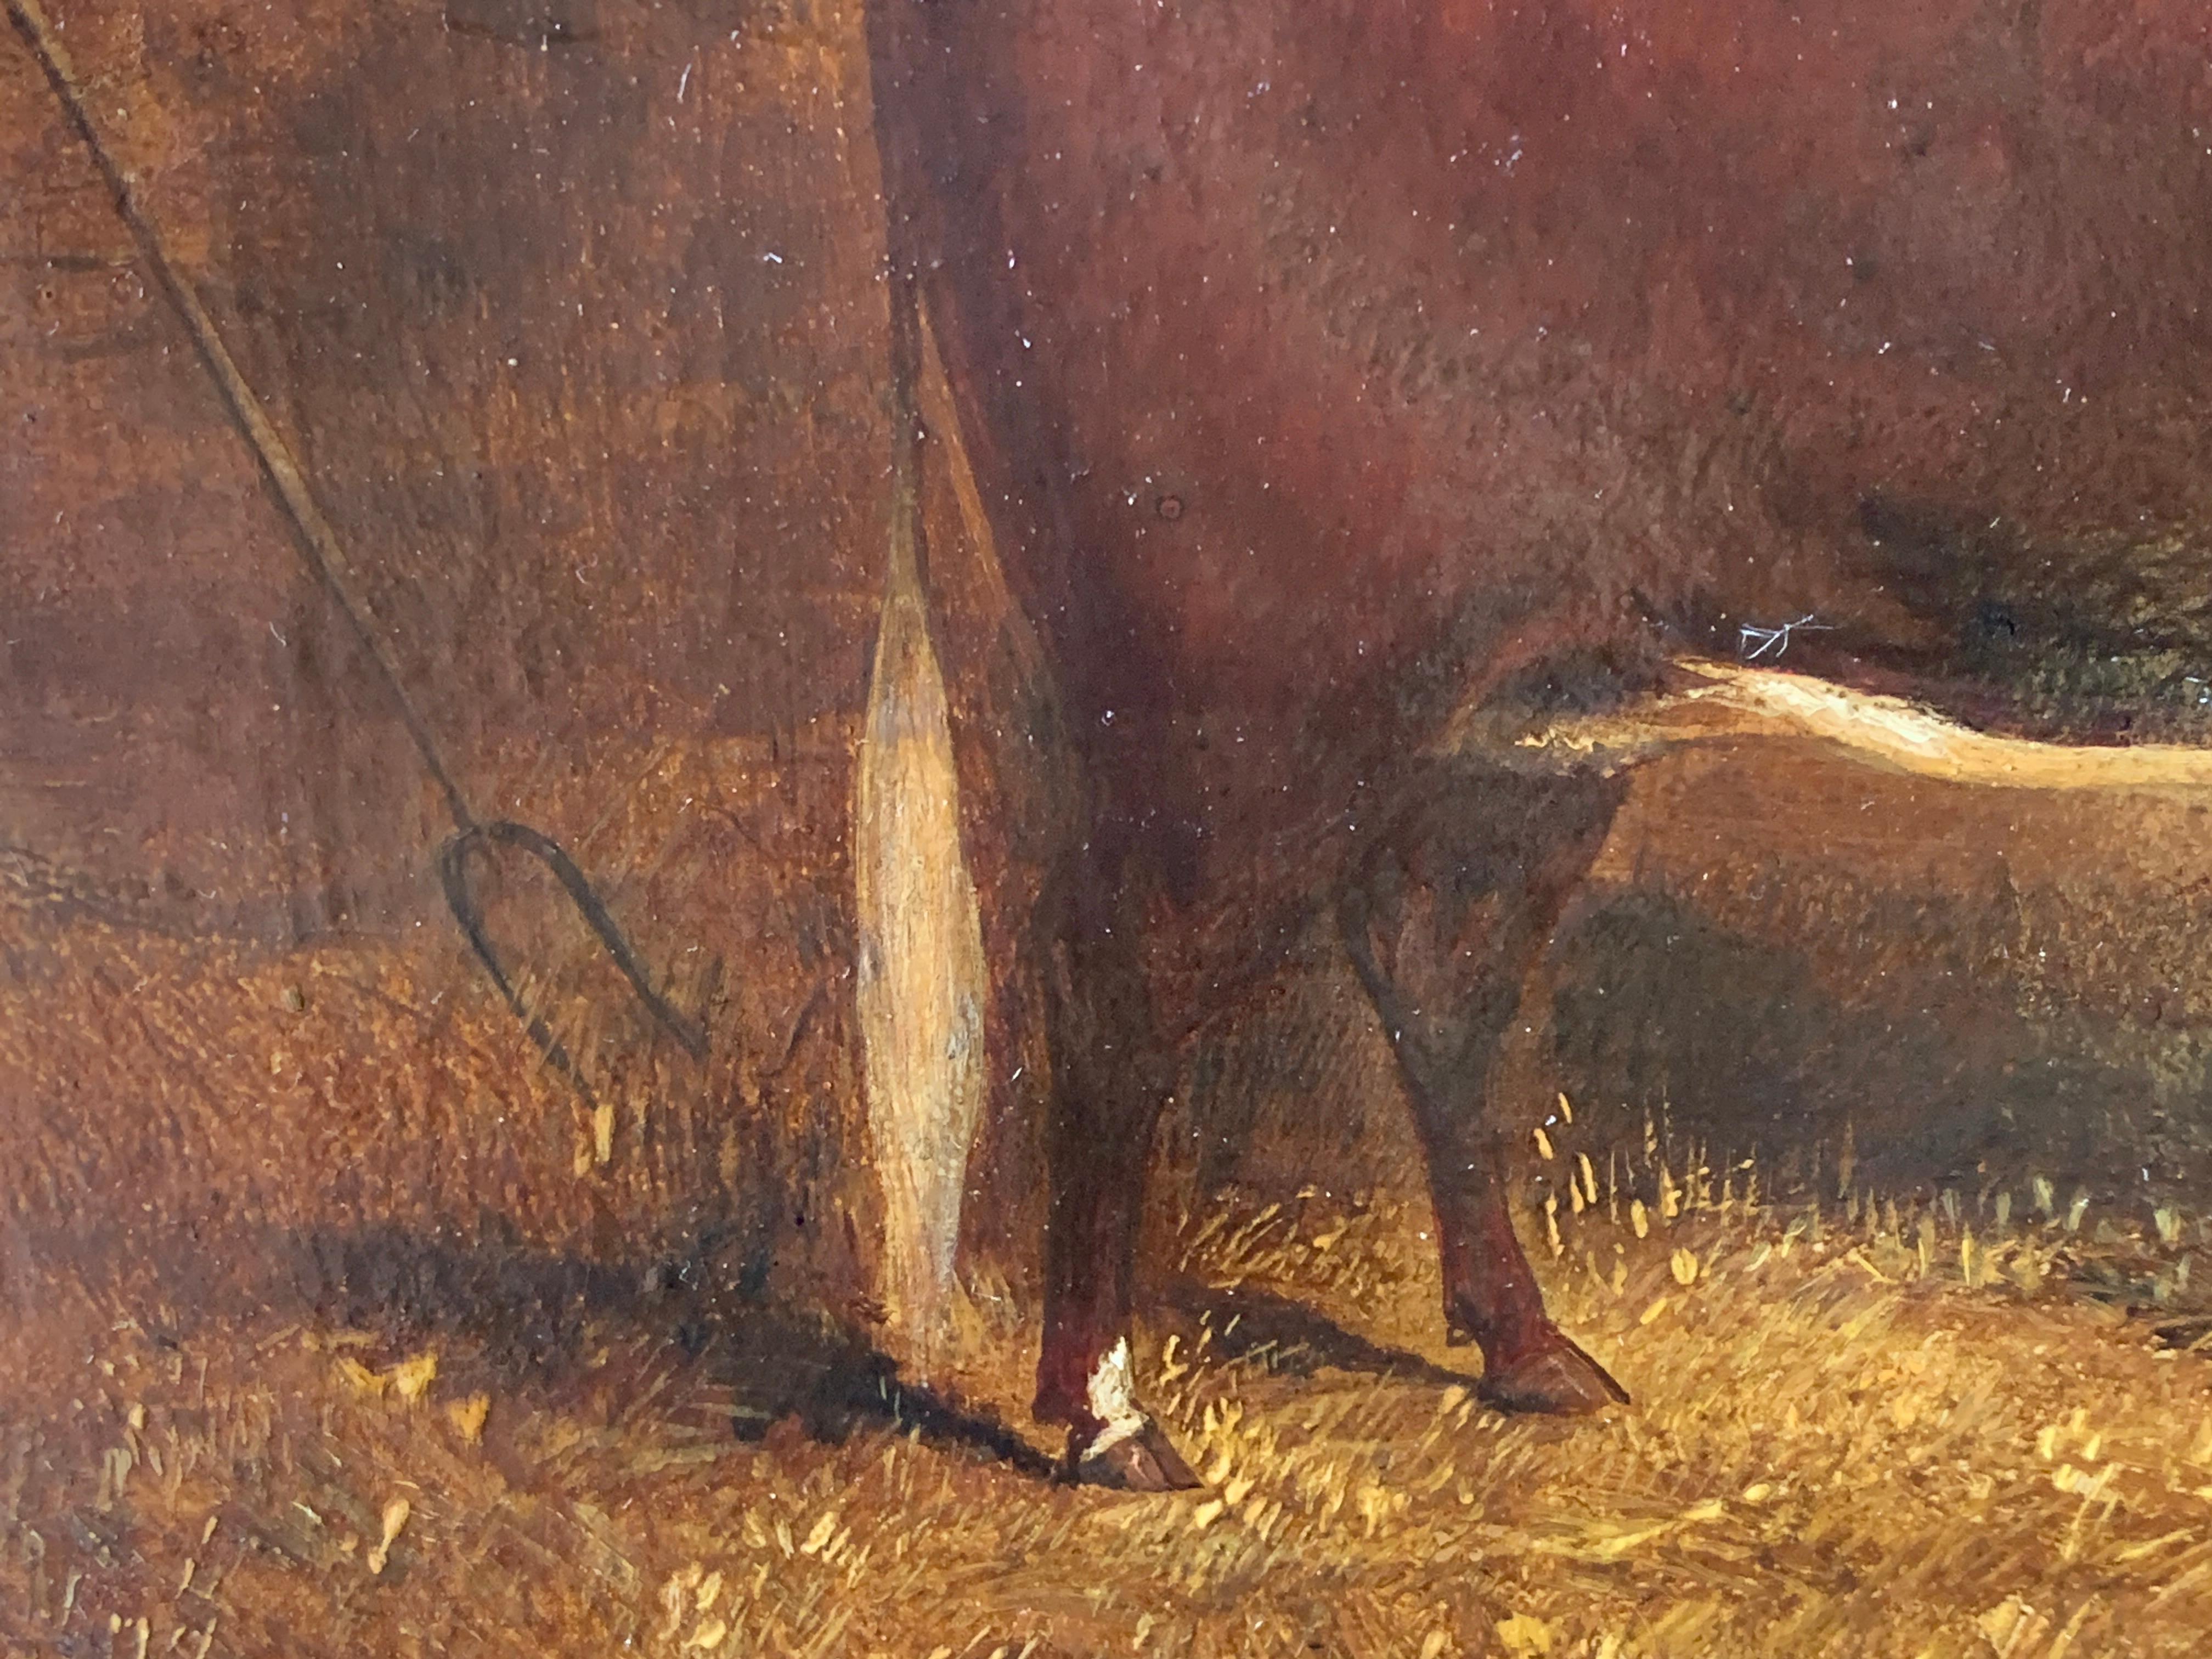 19th Century English Folk art portrait of a Prize winning Cow in a stable - Brown Animal Painting by A.M.Gauci